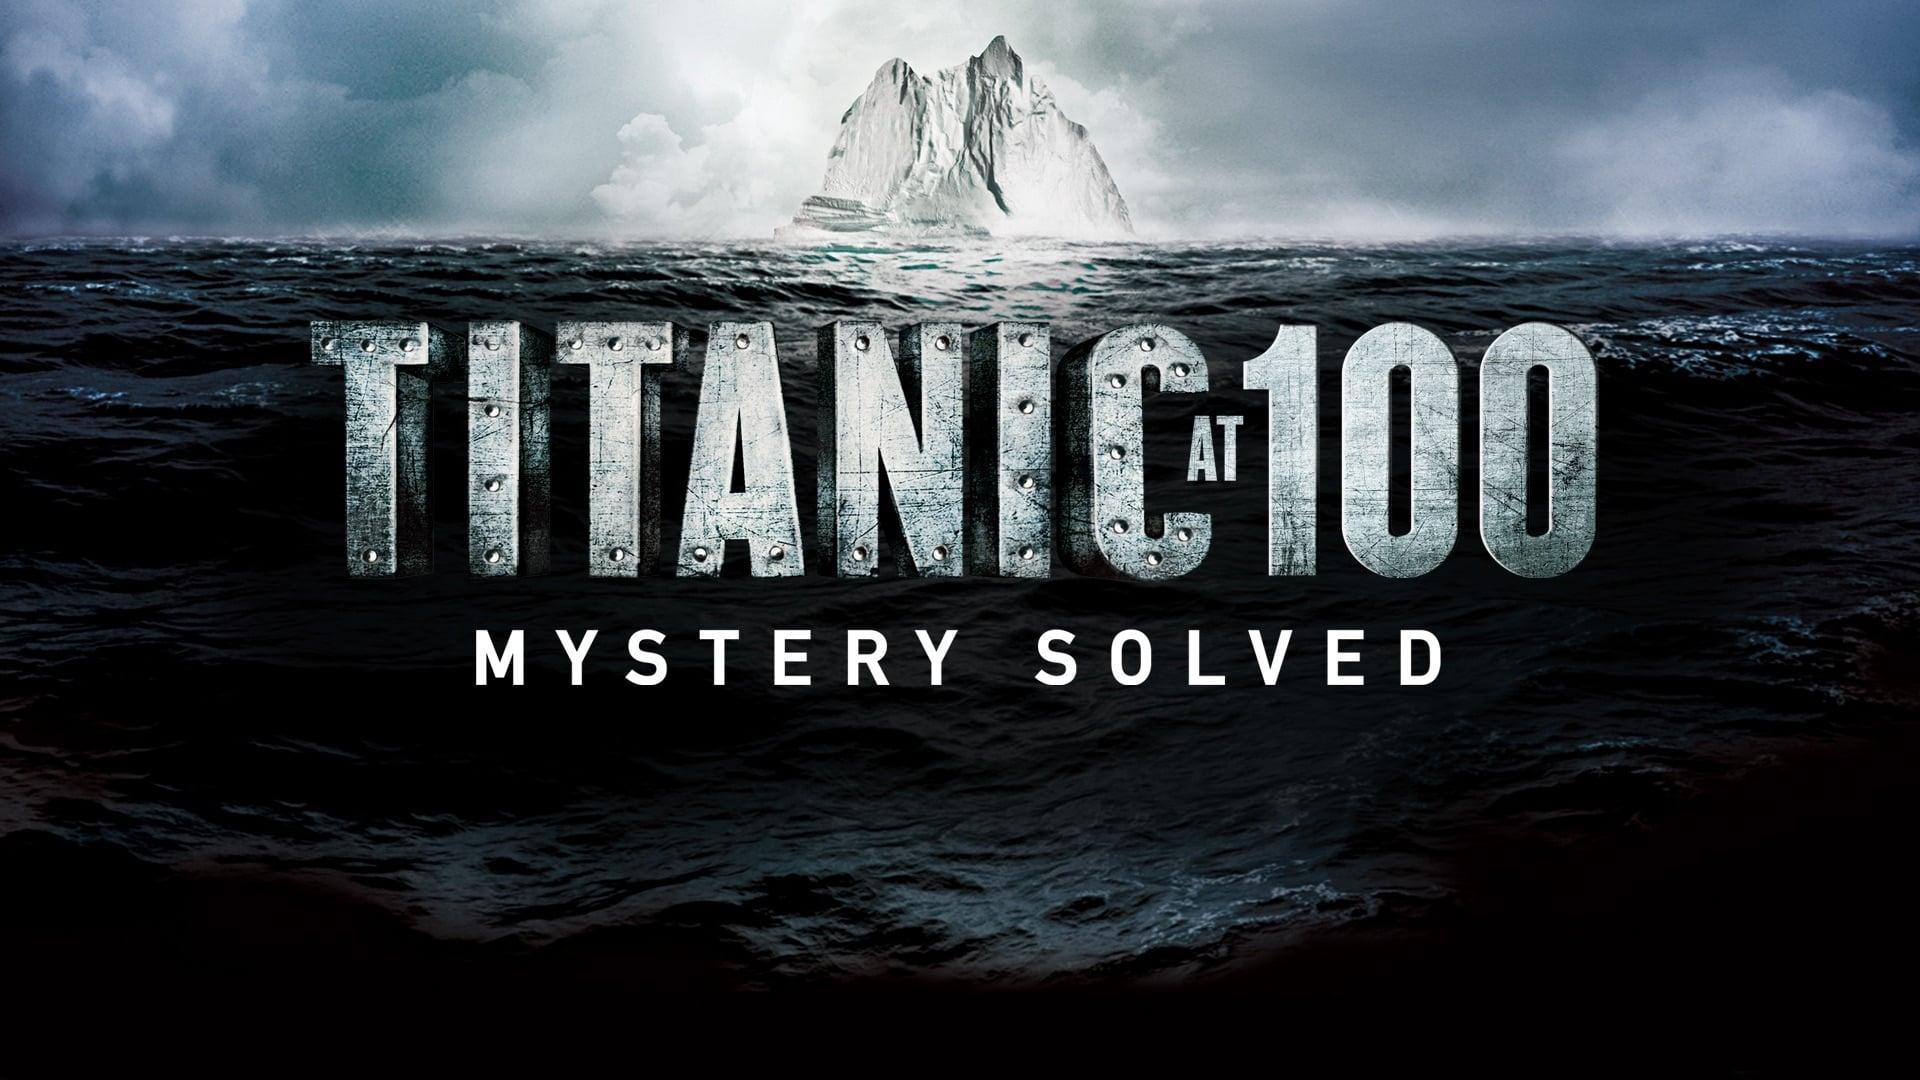 Titanic at 100: Mystery Solved backdrop